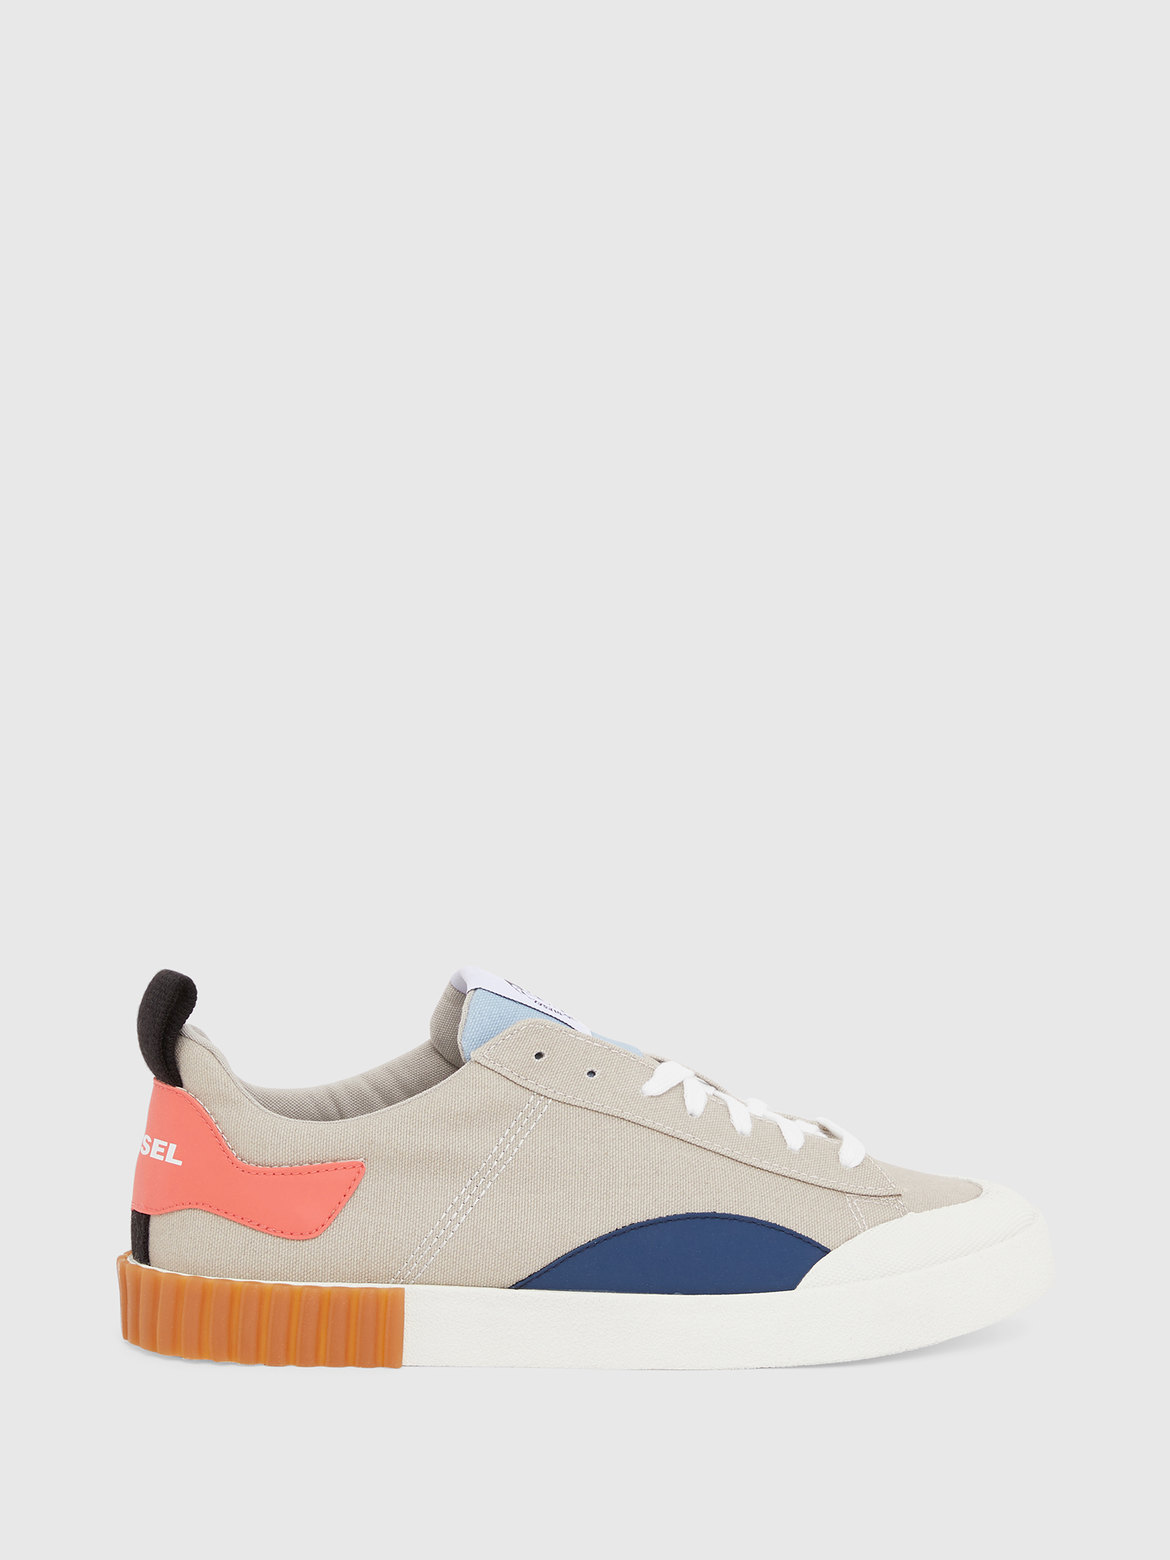 Low-Top Sneakers In Canvas And Cotton | Diesel